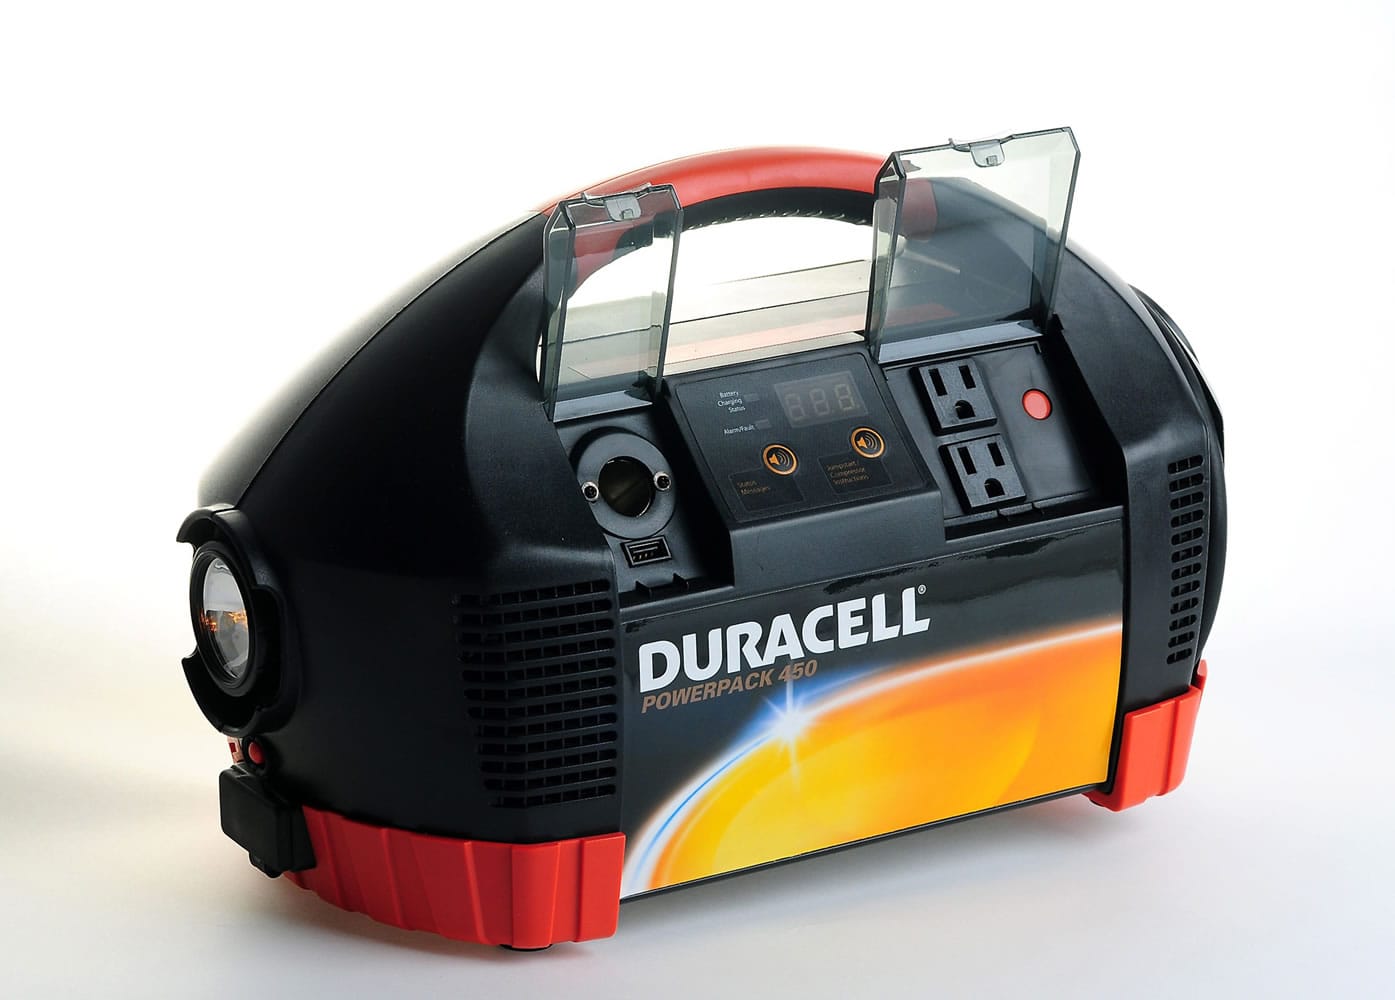 Jeff Siner/Charlotte Observer The Duracell PowerPack 450 ($189) can handle a variety of tasks, including charging your cell phone, if the power goes down.